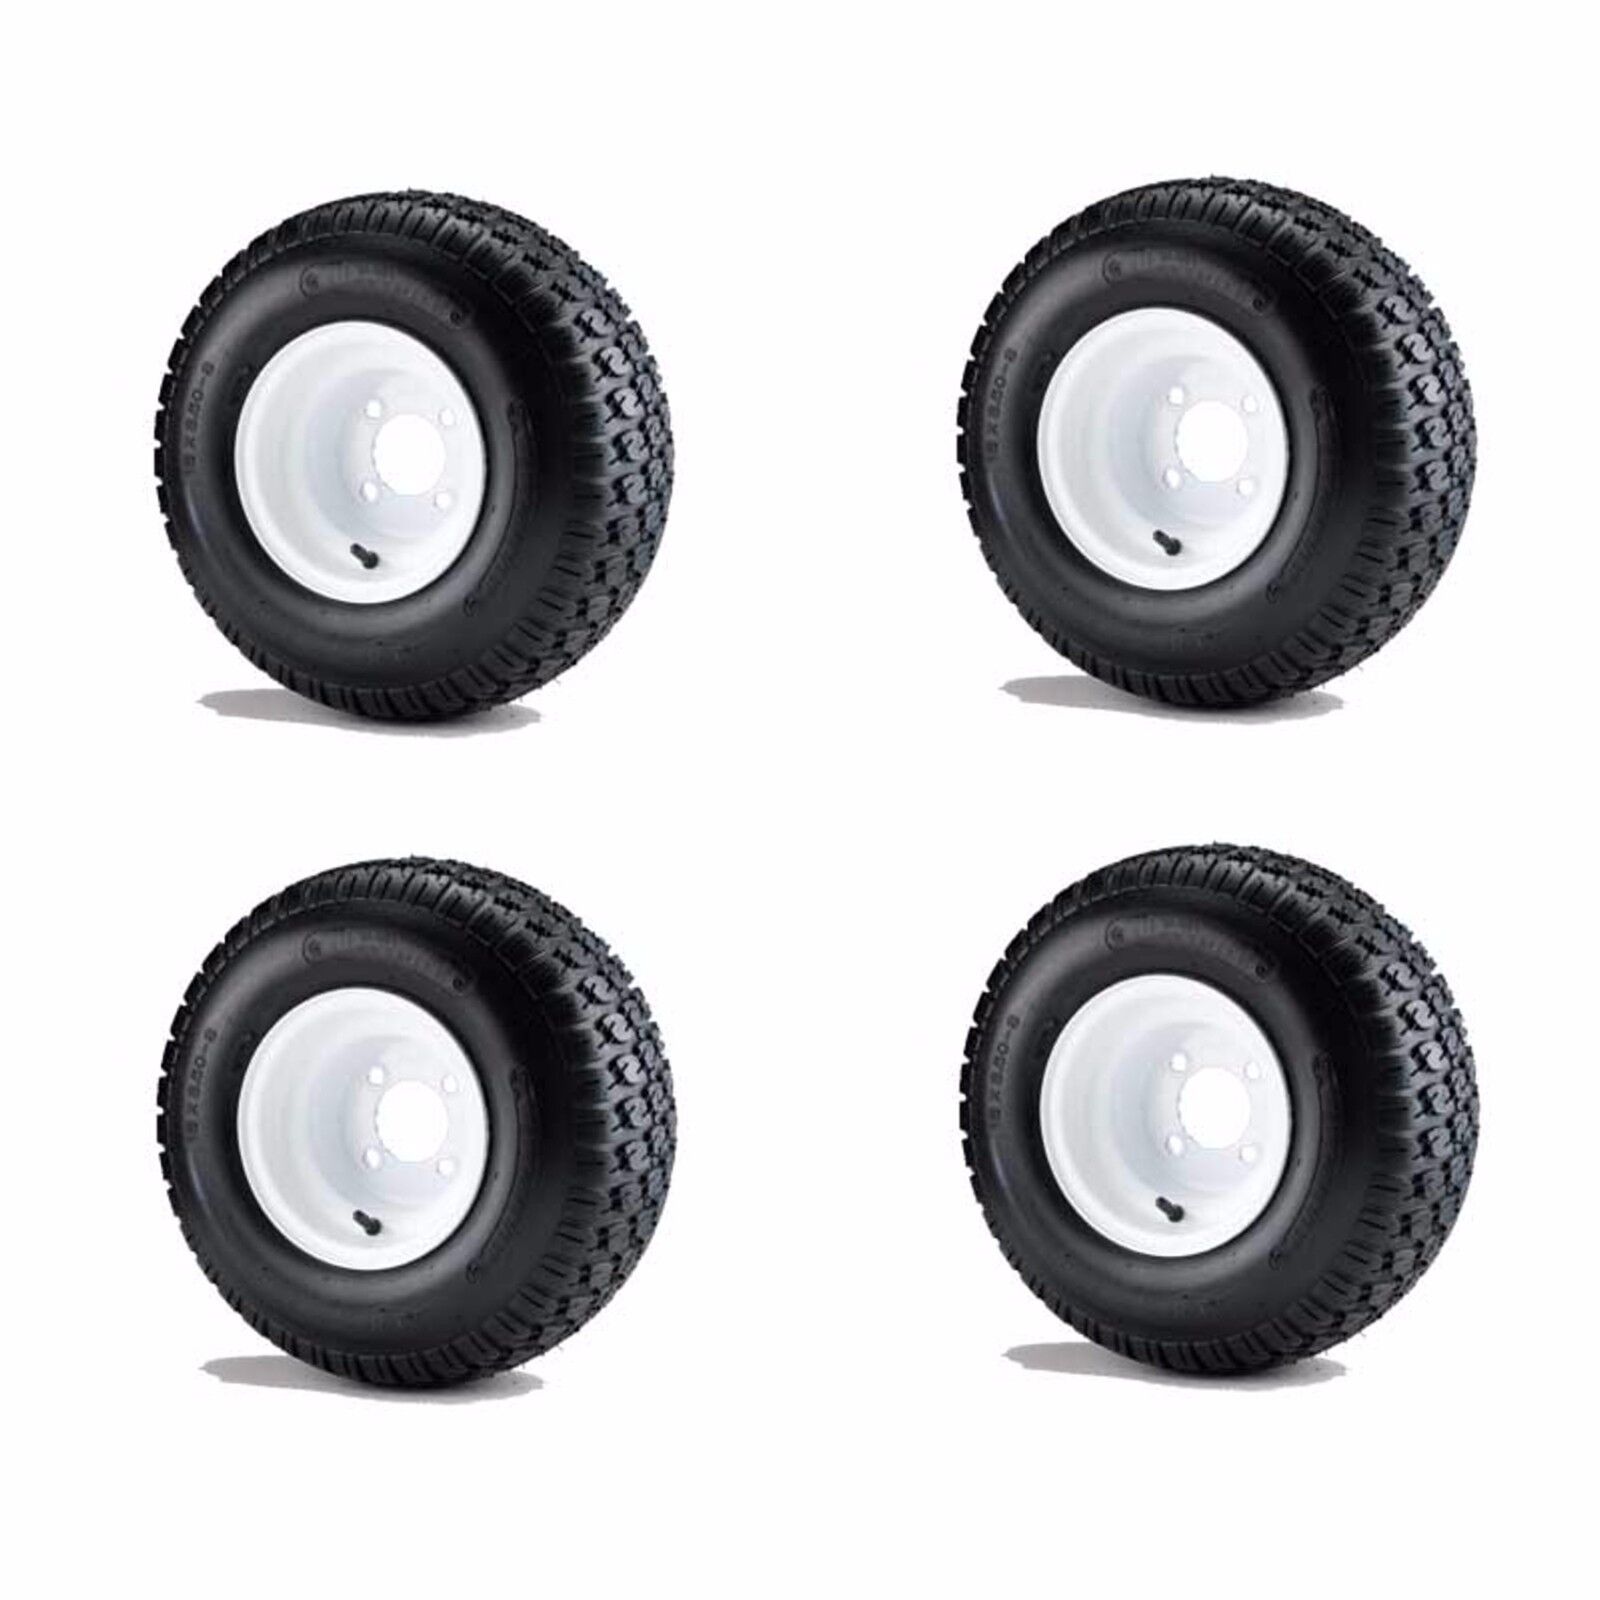 Set of 4 Golf Cart 18x8.50-8 6 Ply Traction Tires mounted on 8" White Wheels Aftermarket Products 30225